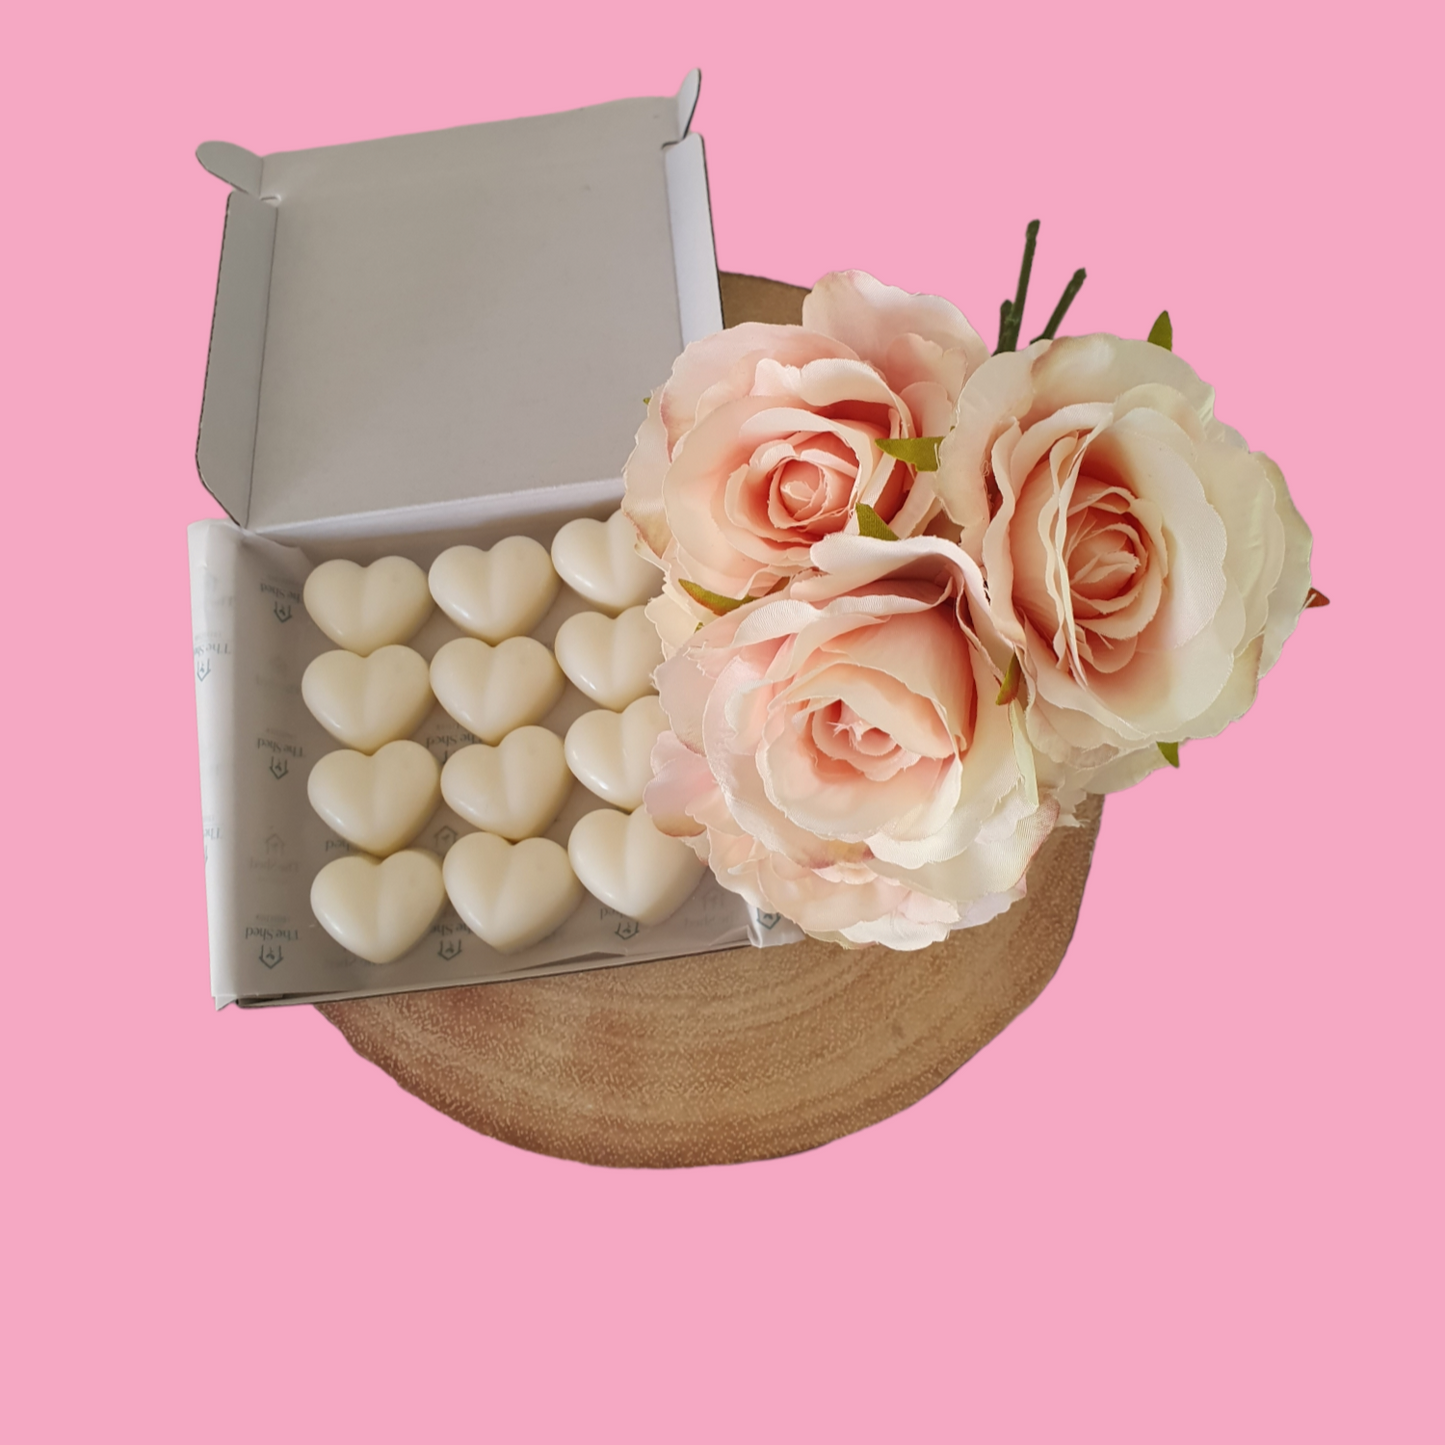 Heart shaped wax melts in a box beside a bunch of pink roses